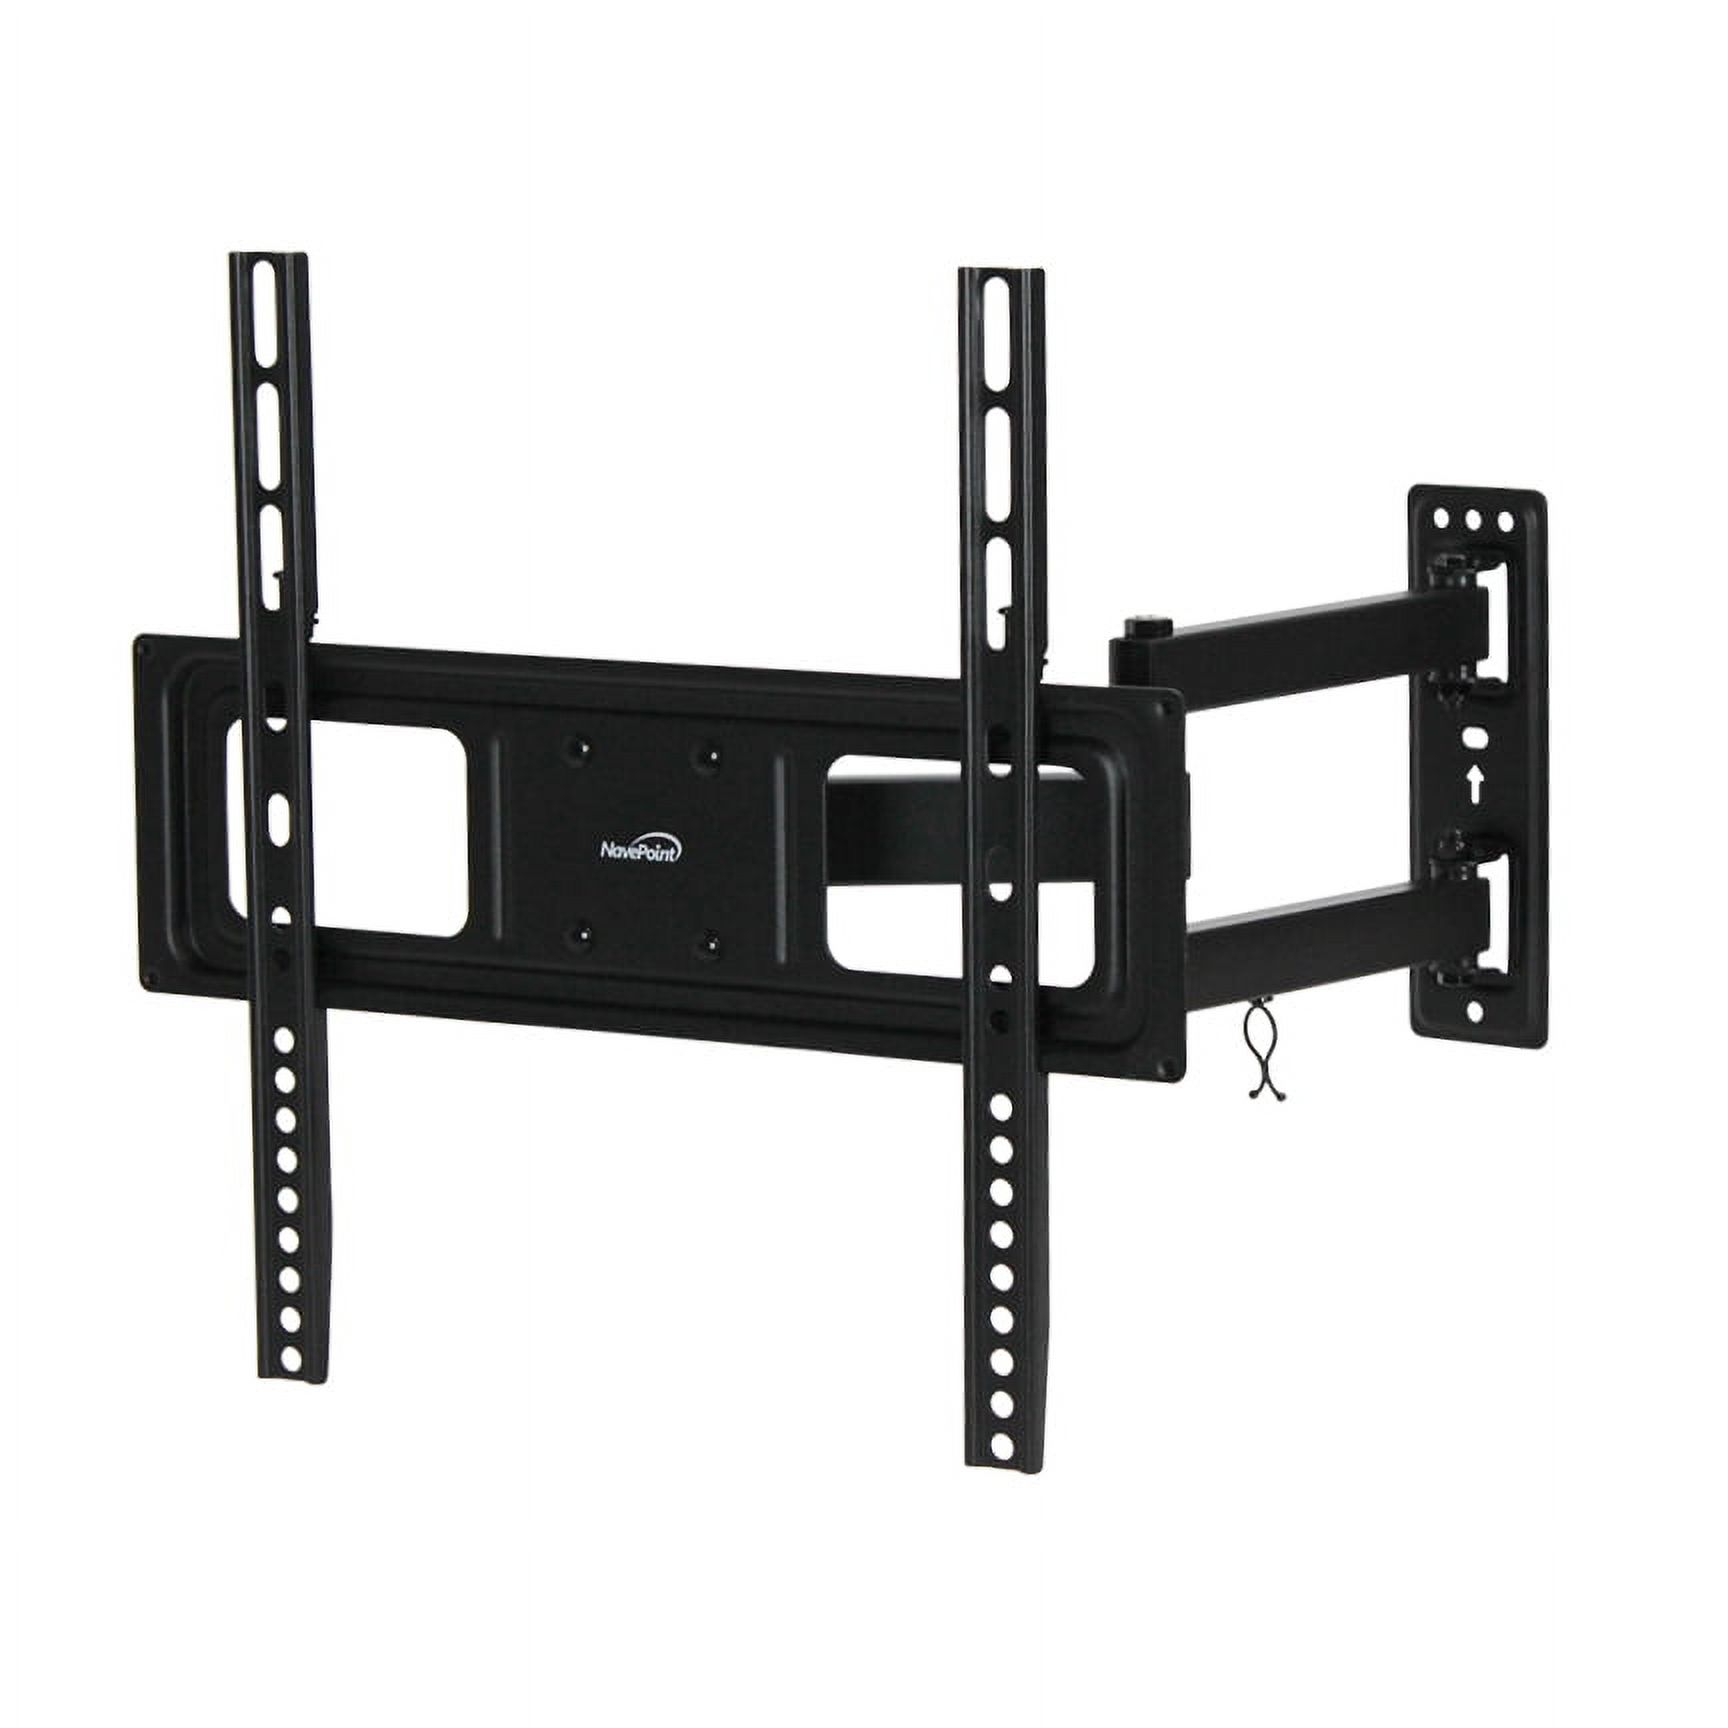 NavePoint Articulating Corner Wall Mount Bracket WithTilt Swivel For LED LCD Plasma Flat Screen TV From 32-55 Inches Black - image 1 of 6